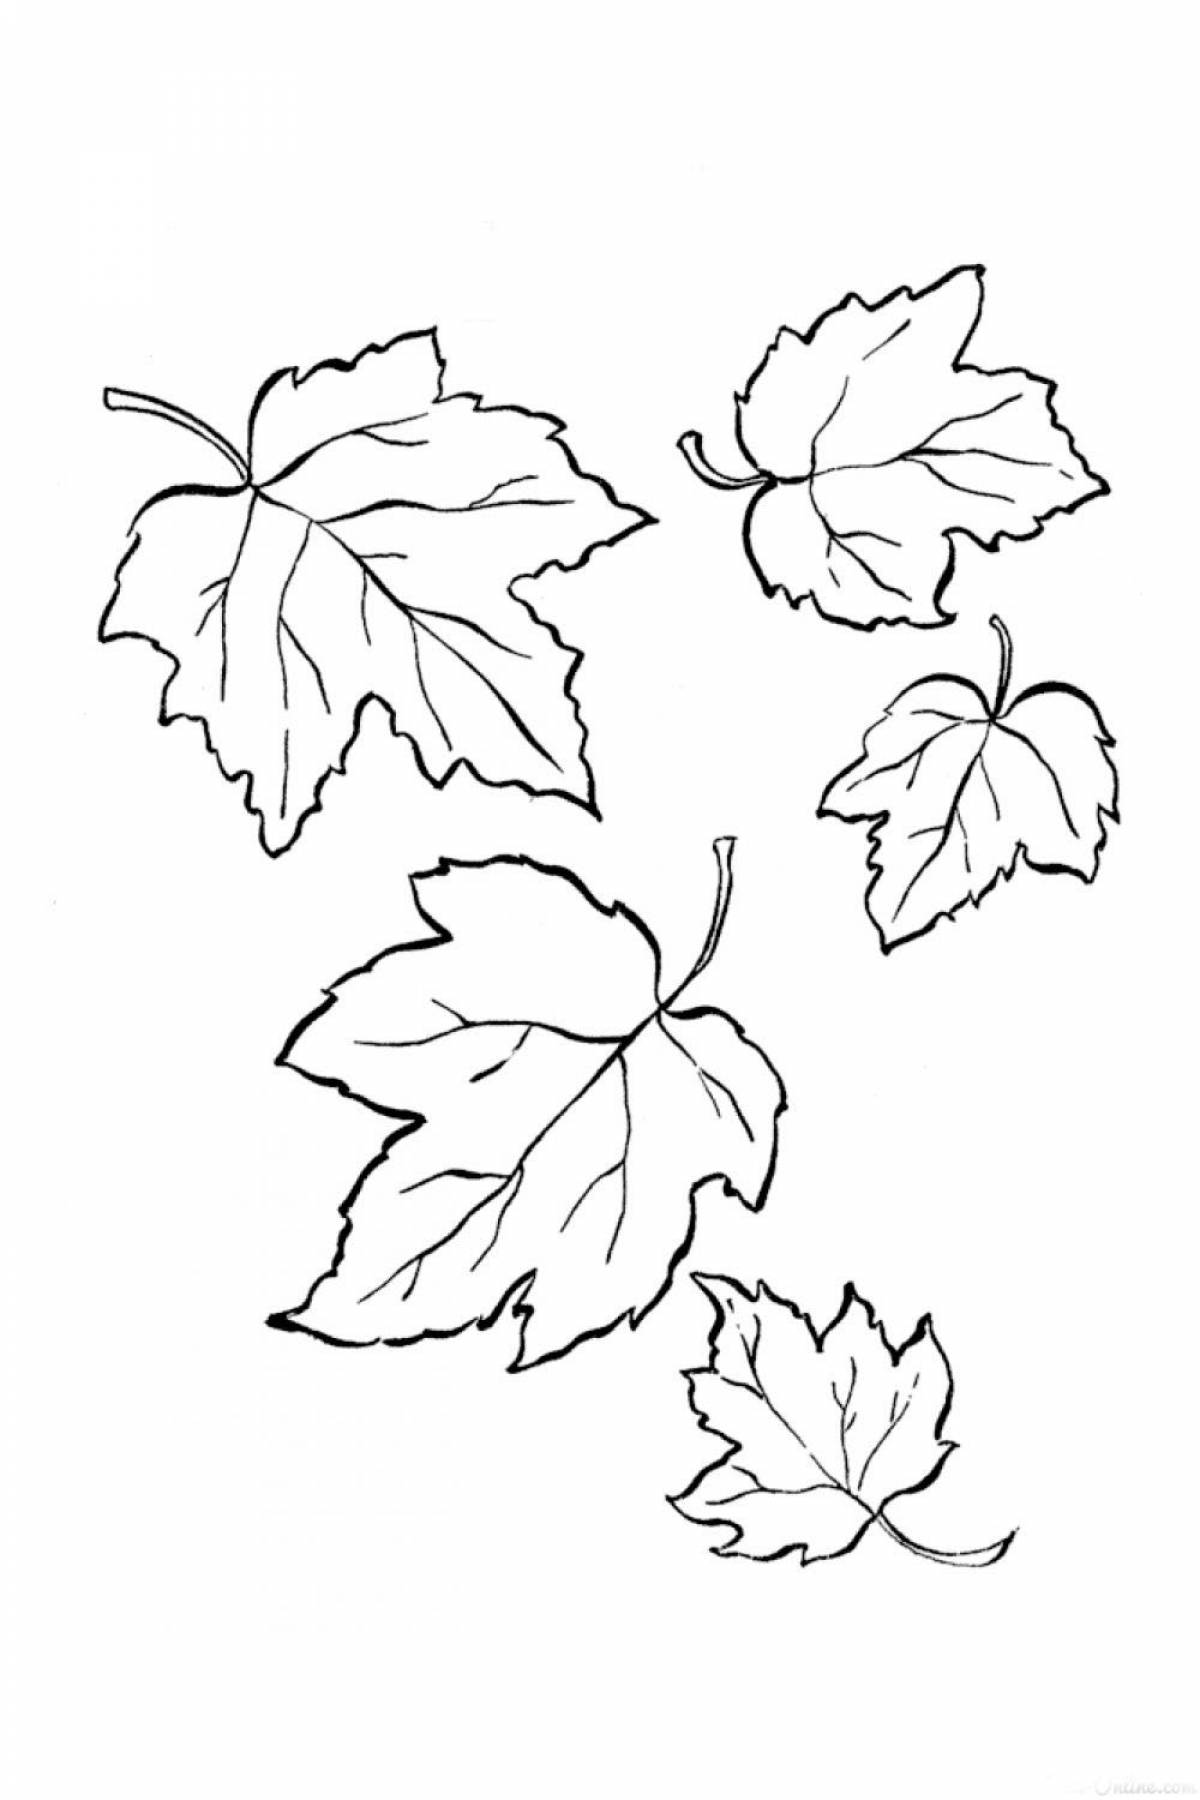 Autumn leaves coloring page